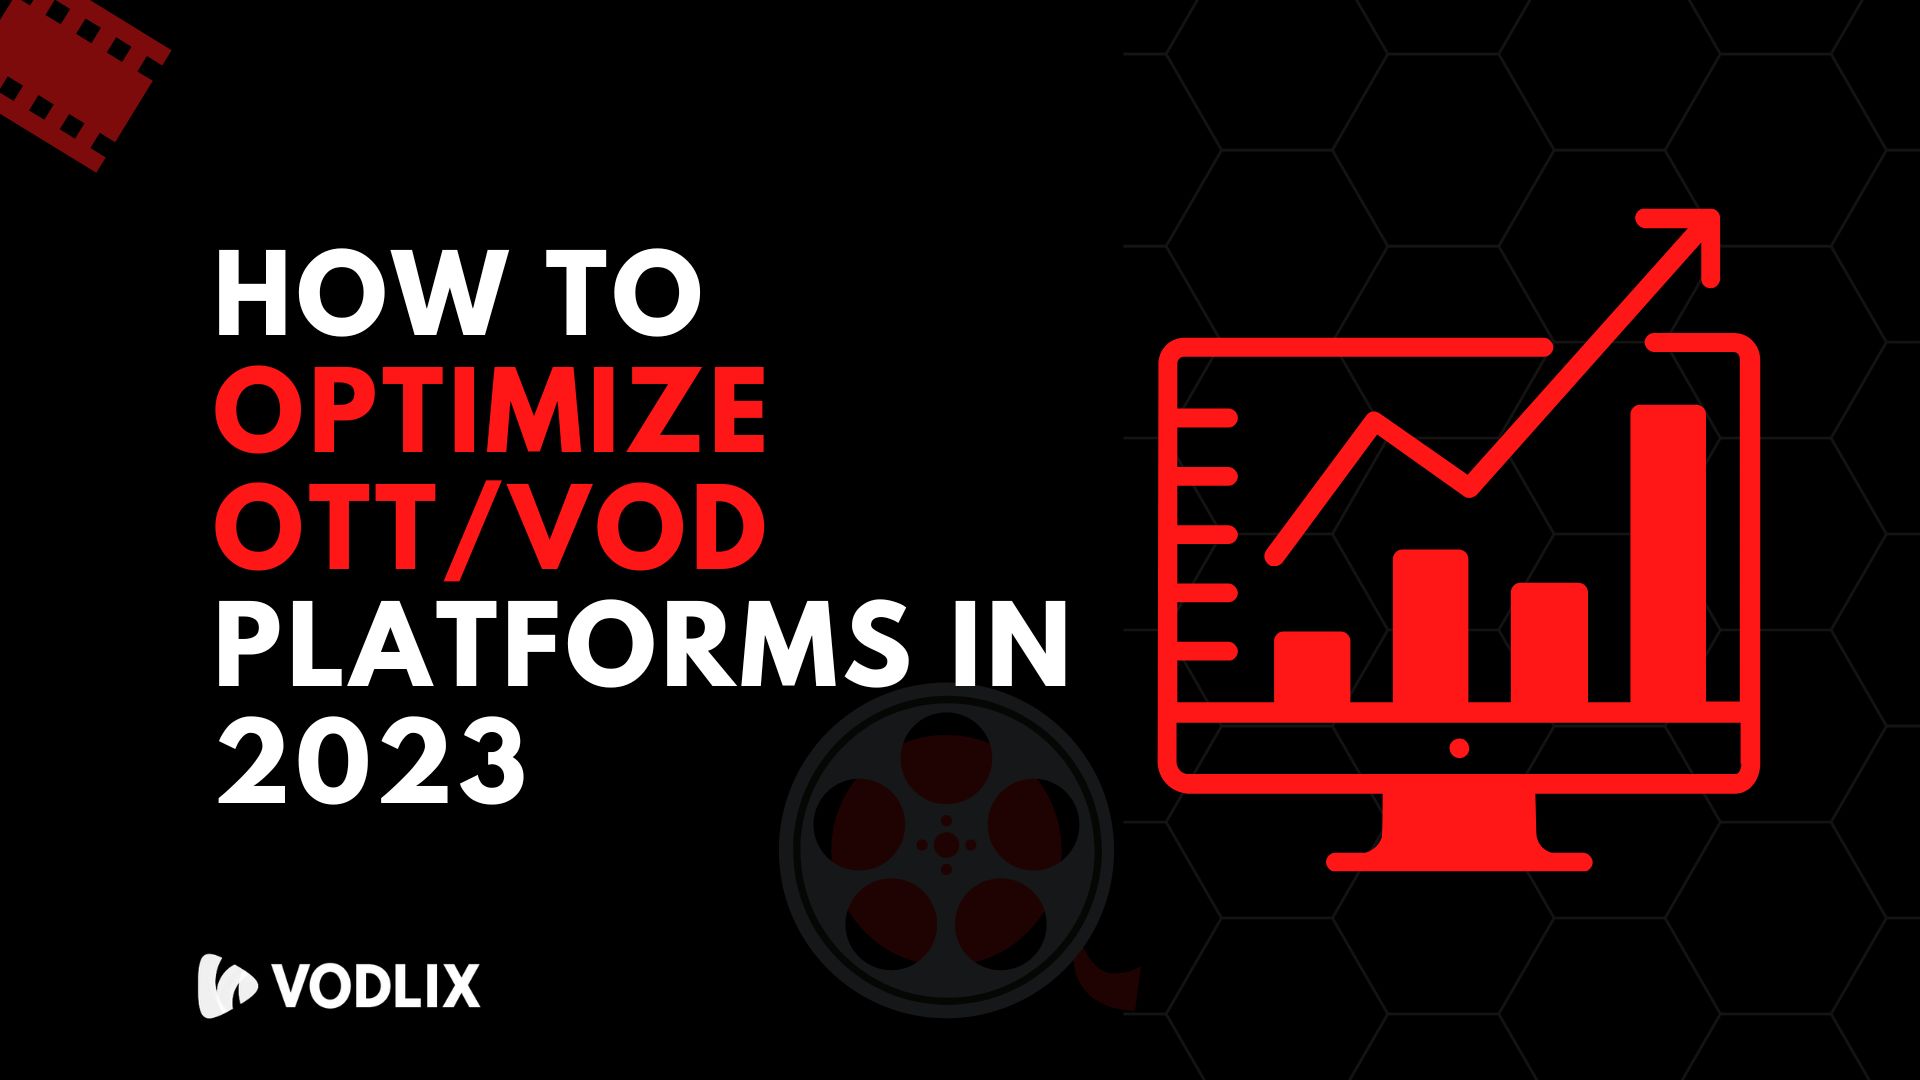 How to Optimize OTT VOD Platforms in 2023